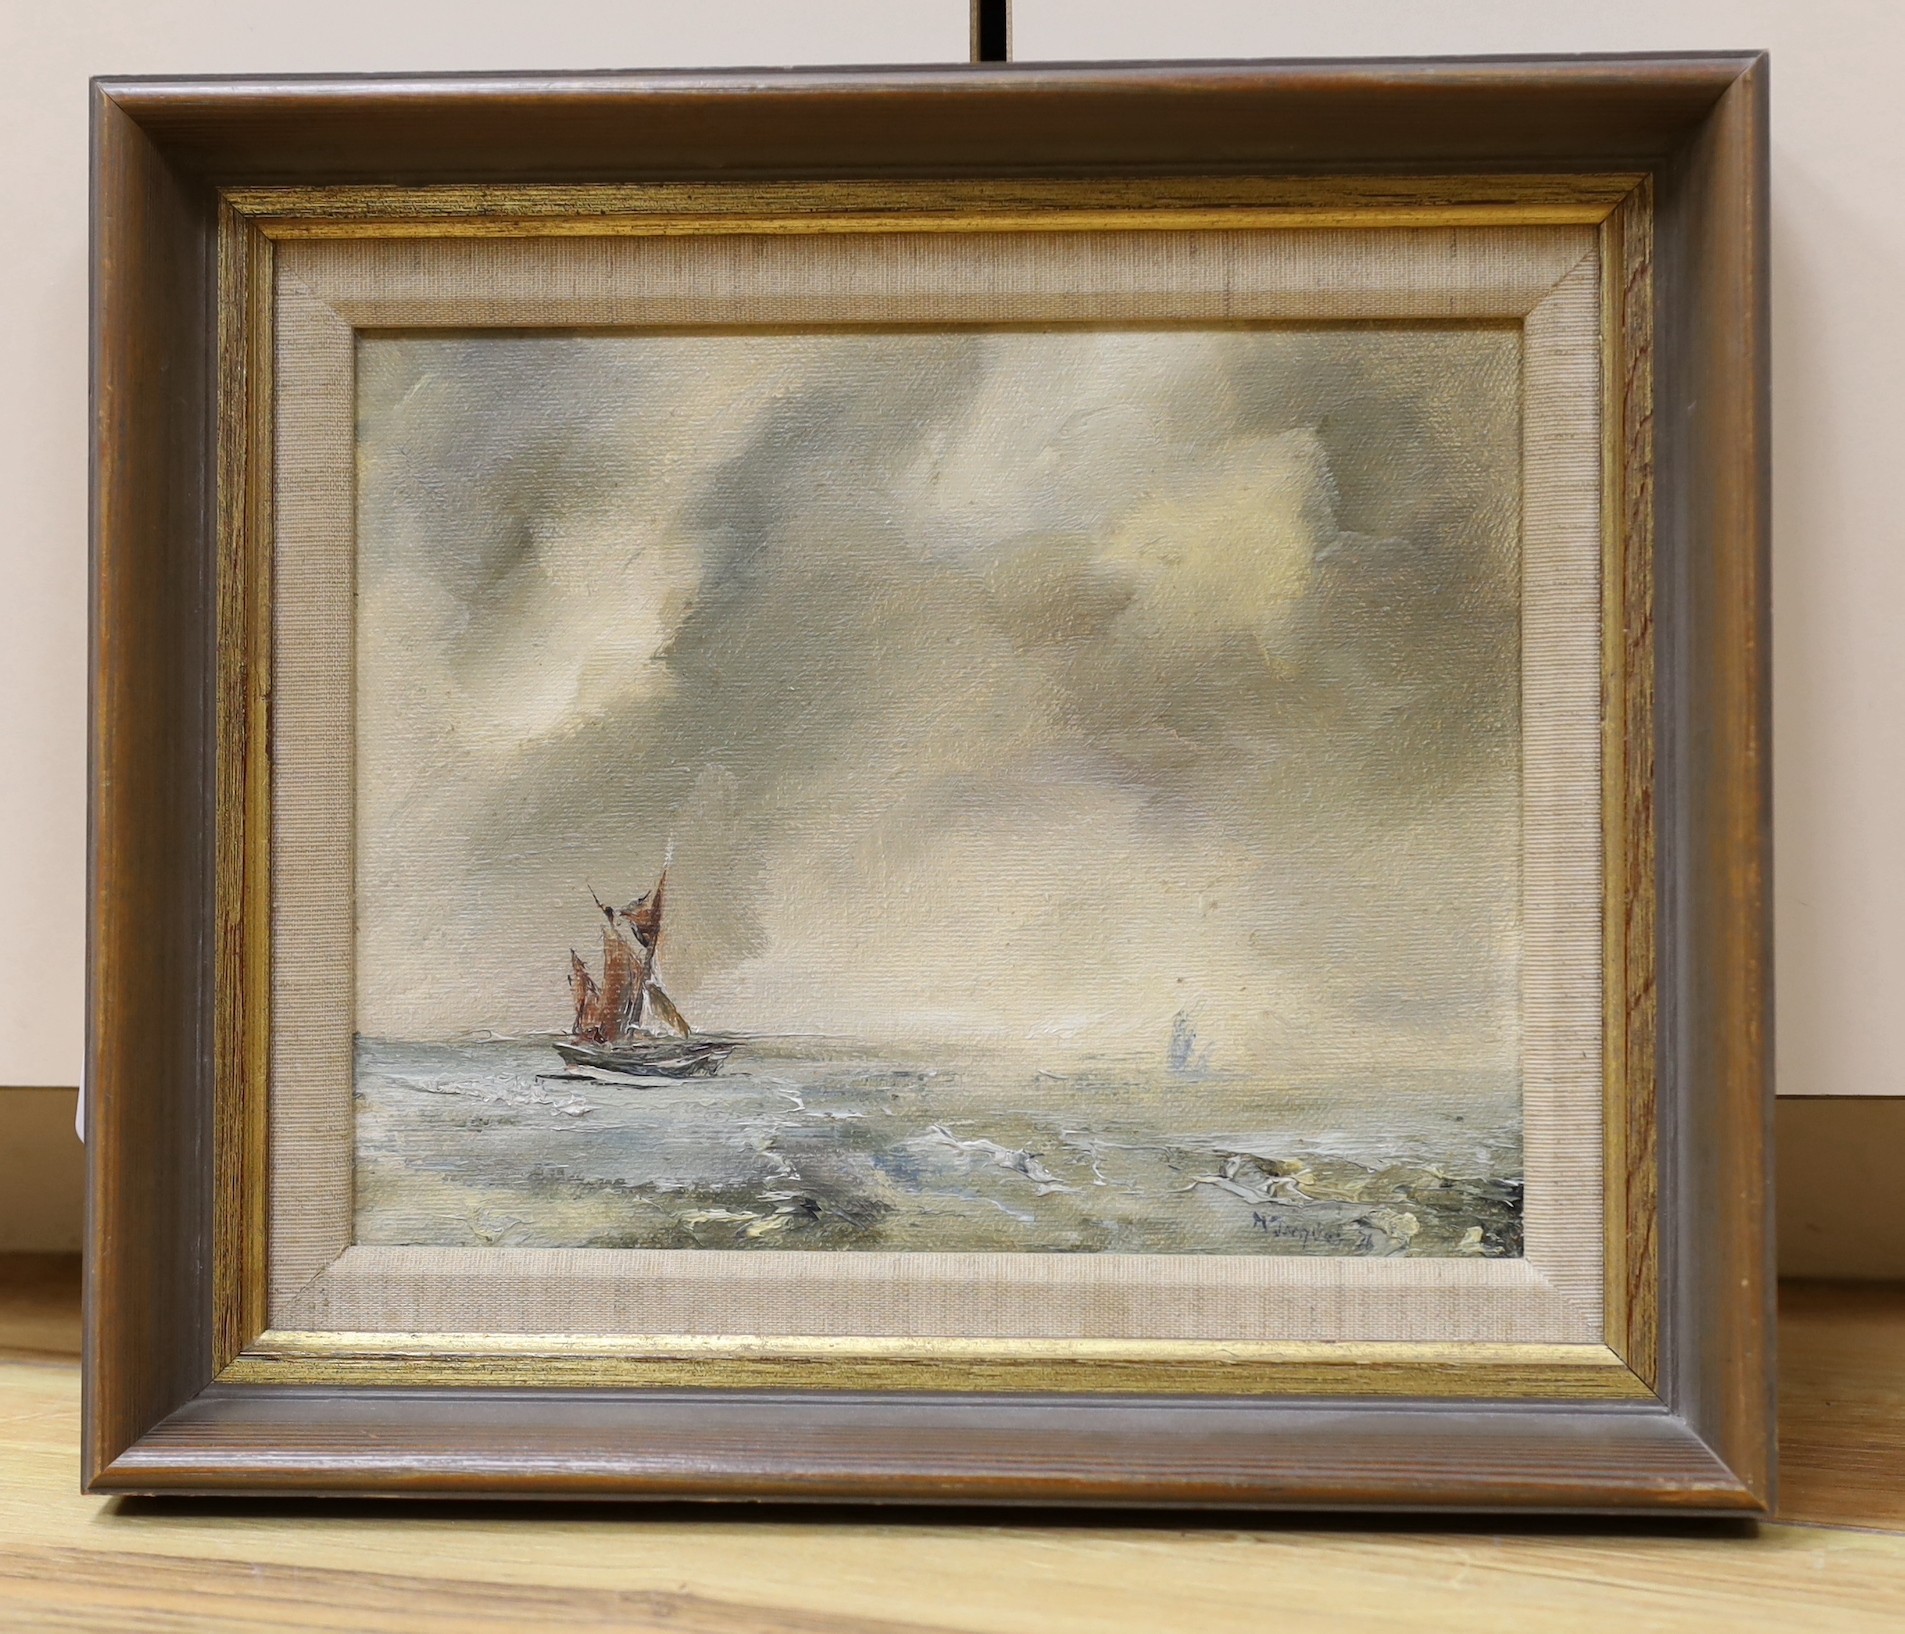 Maureen Jacques, oil on board, ‘Brown Sail’, signed, 19 x 24cm